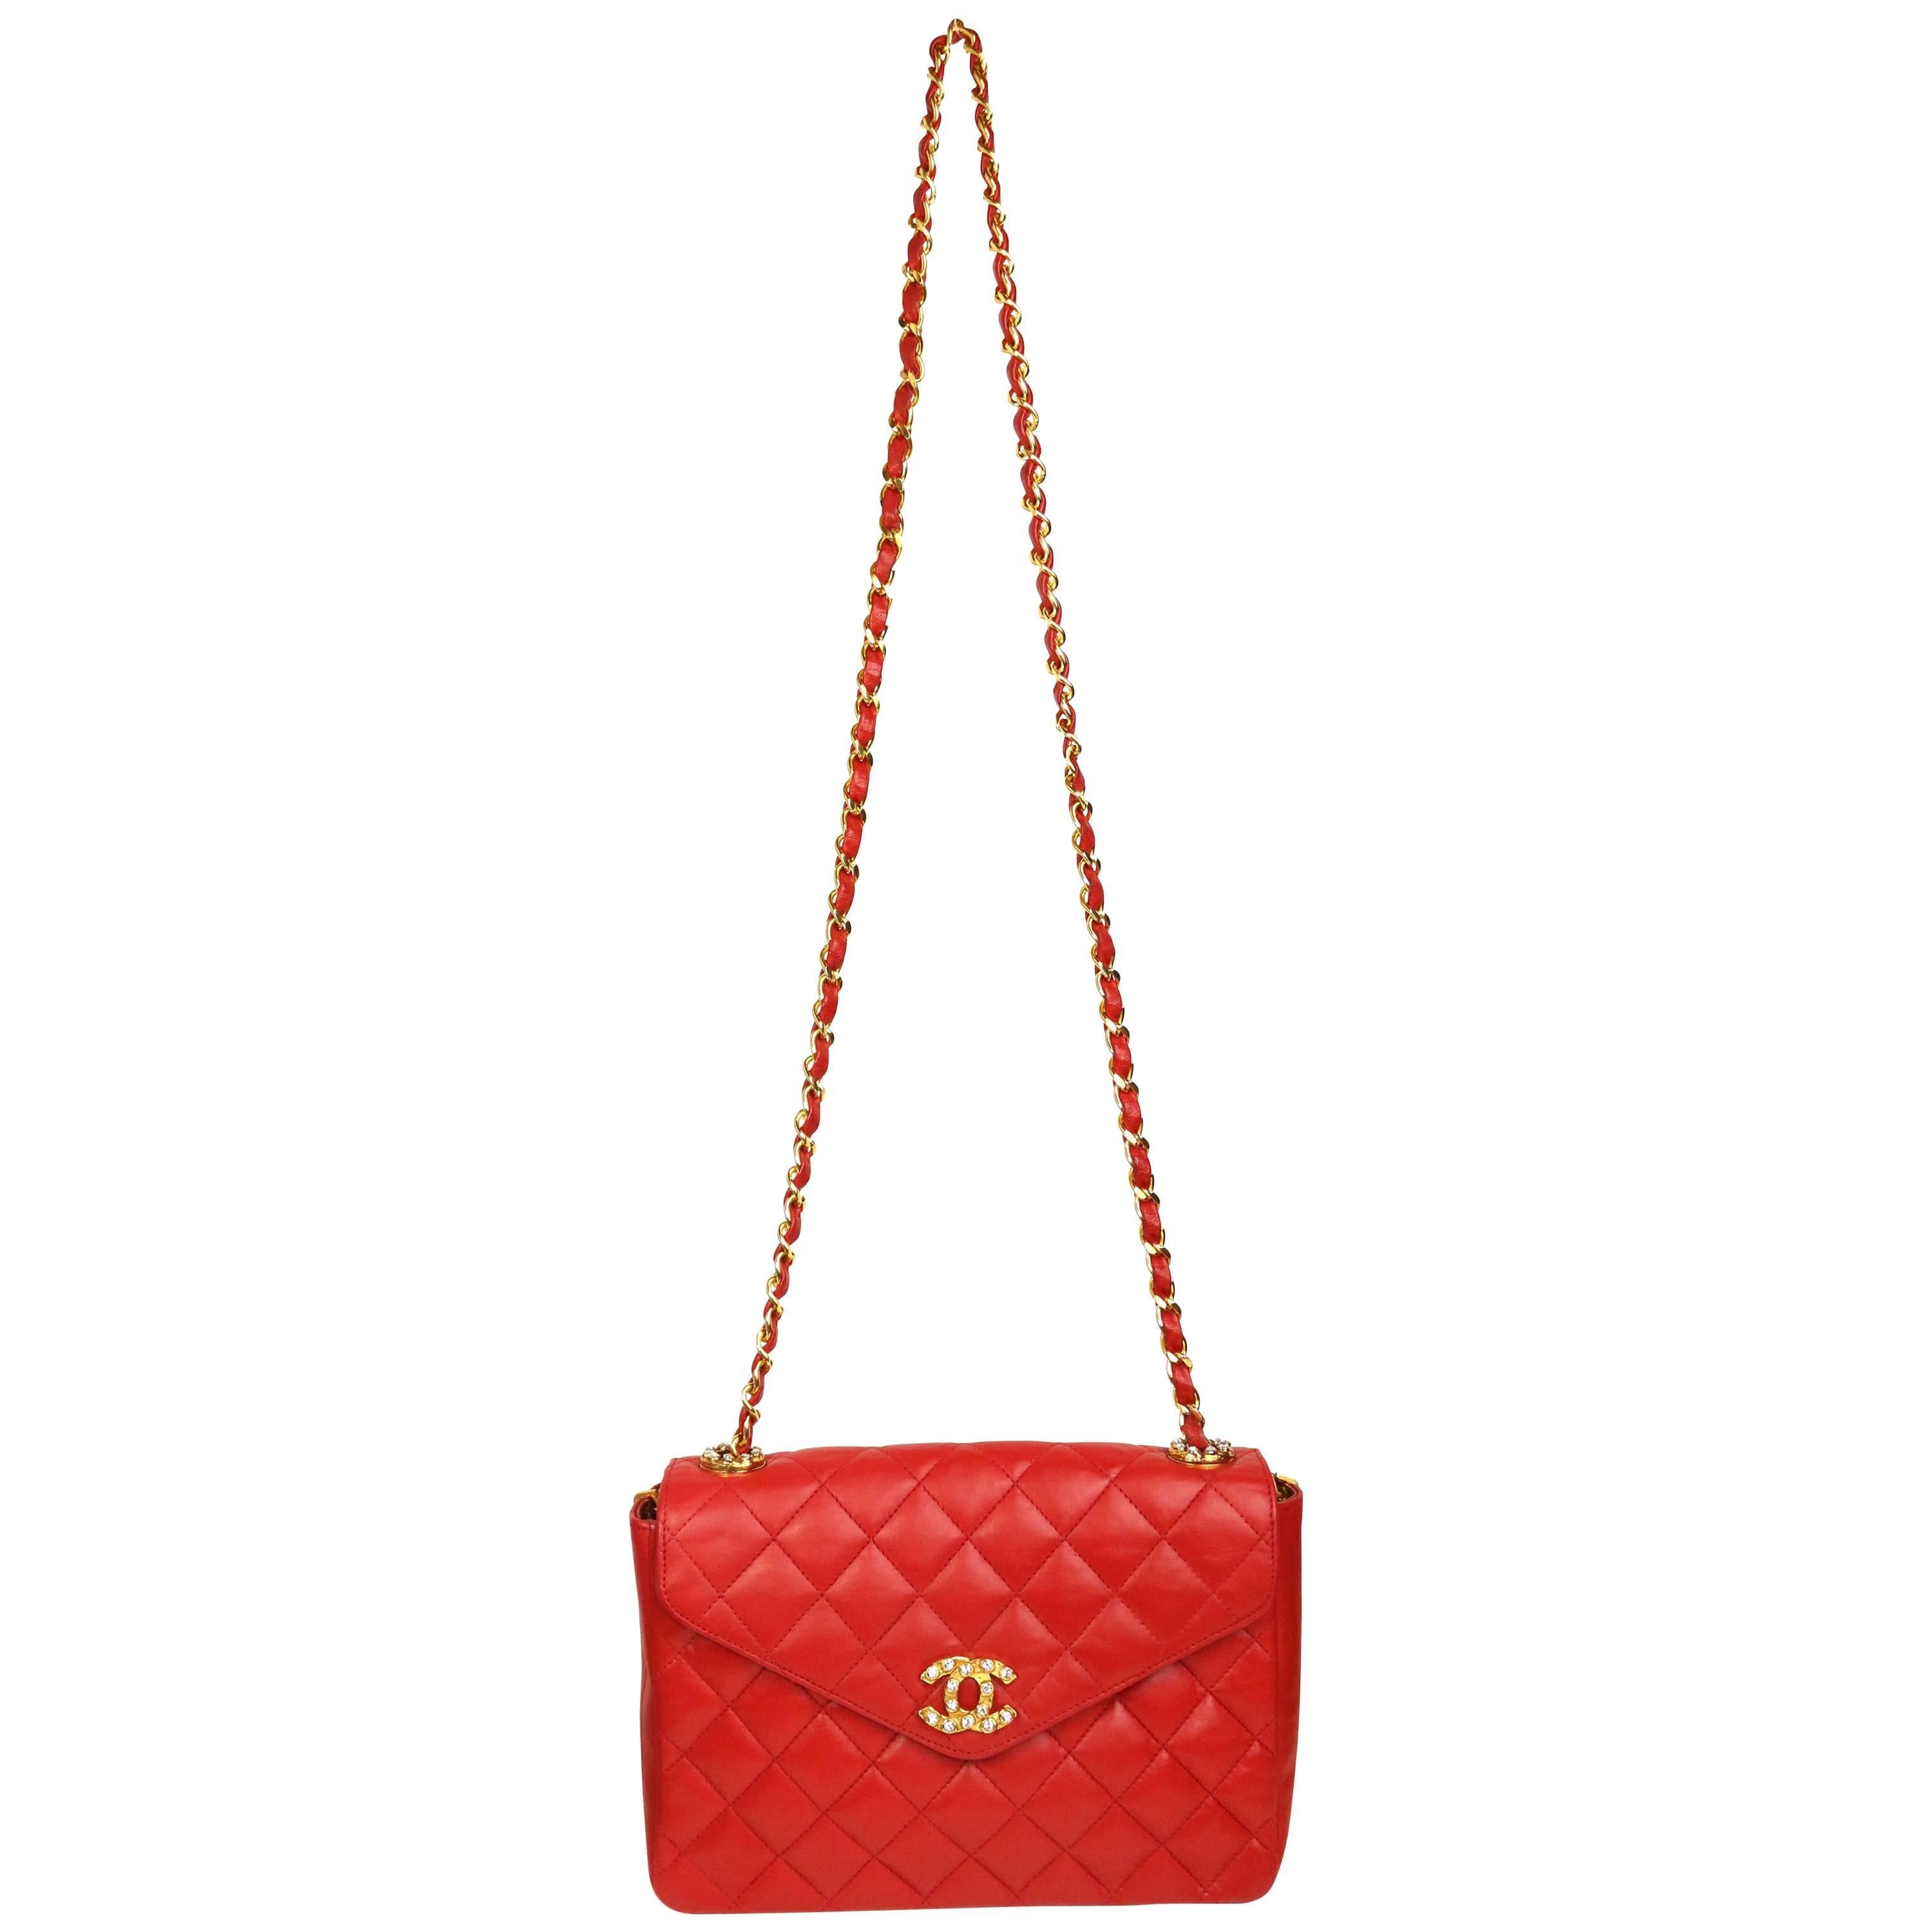 Chanel Classic Red Quilted Lambskin Leather CC Rhinestones Flap Shoulder  Bag